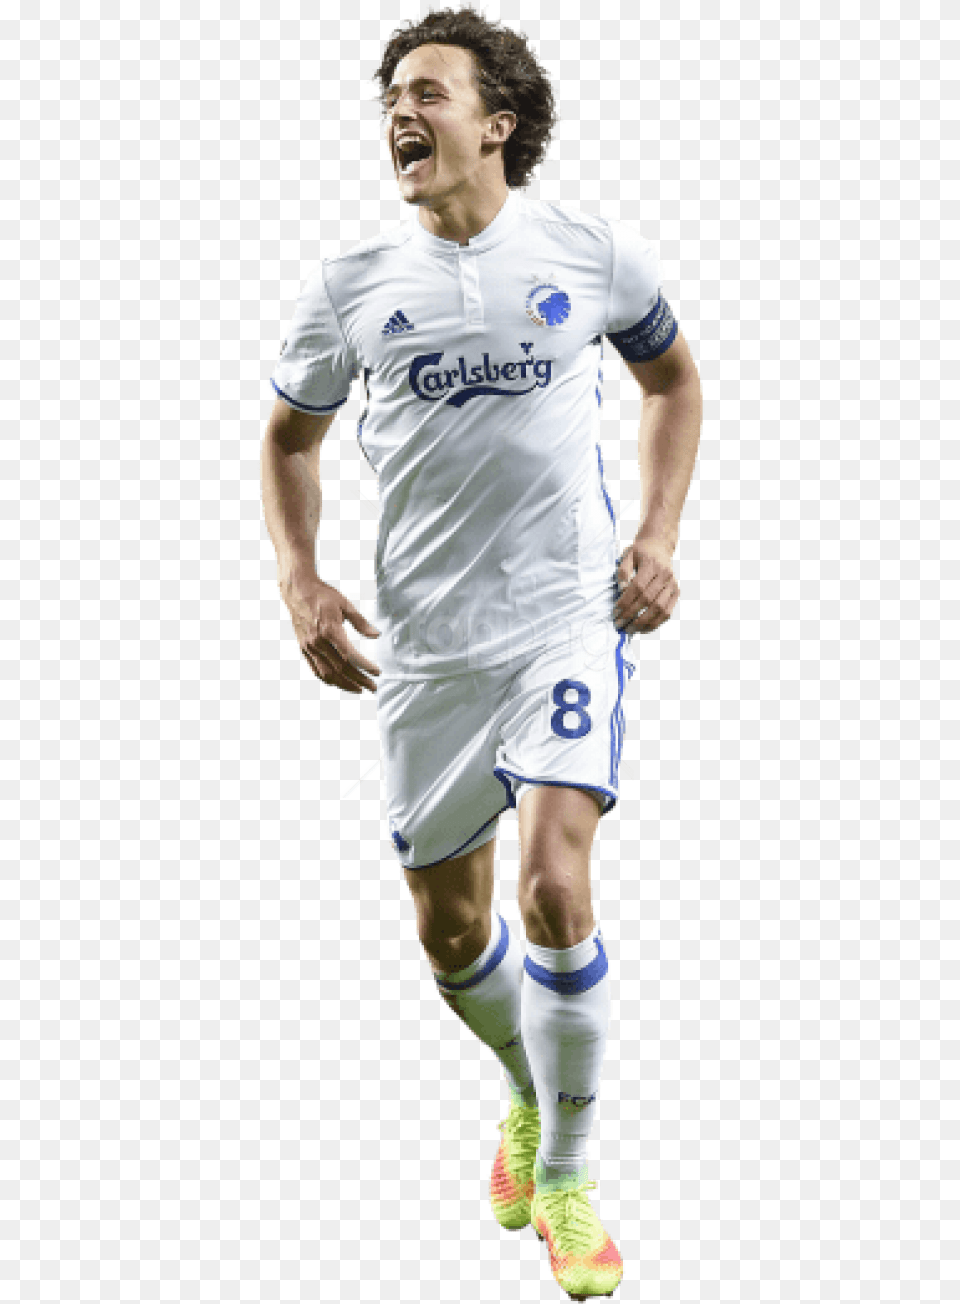 Download Thomas Delaney Images Background Football Player, Shorts, Clothing, Shirt, Shoe Png